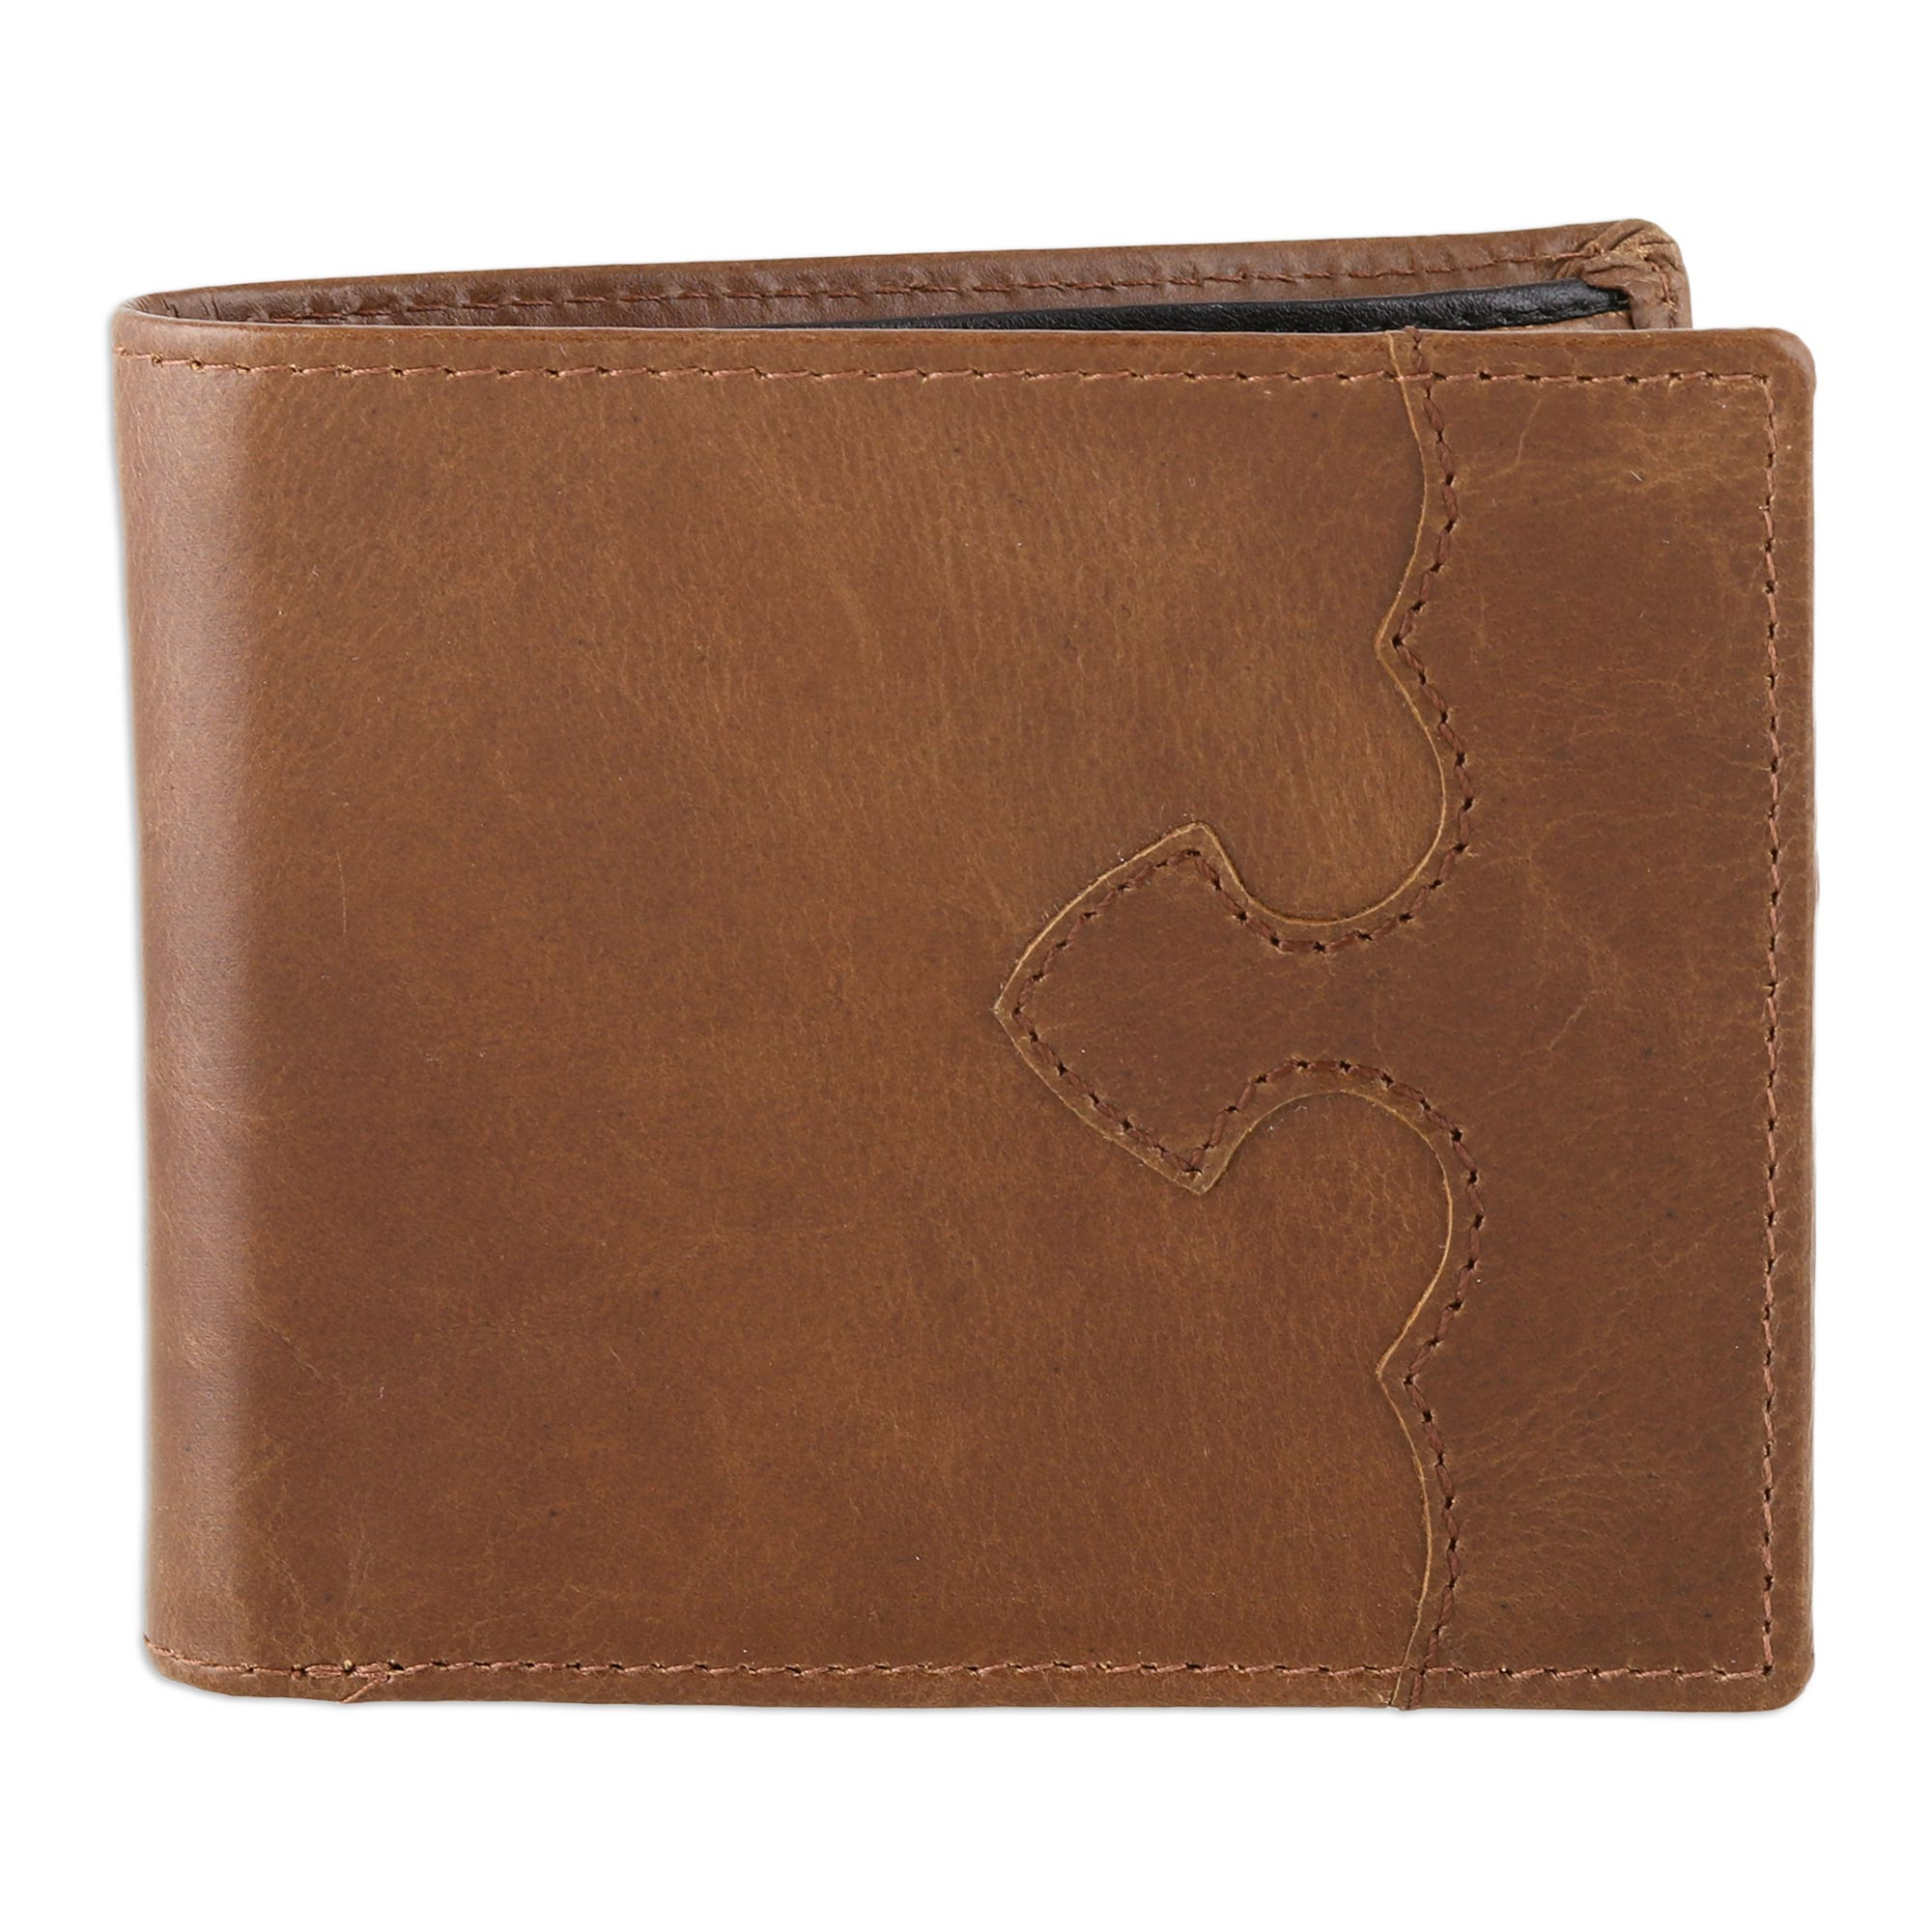 UNICEF Market | Handmade Leather Wallet in Redwood from India - Redwood ...